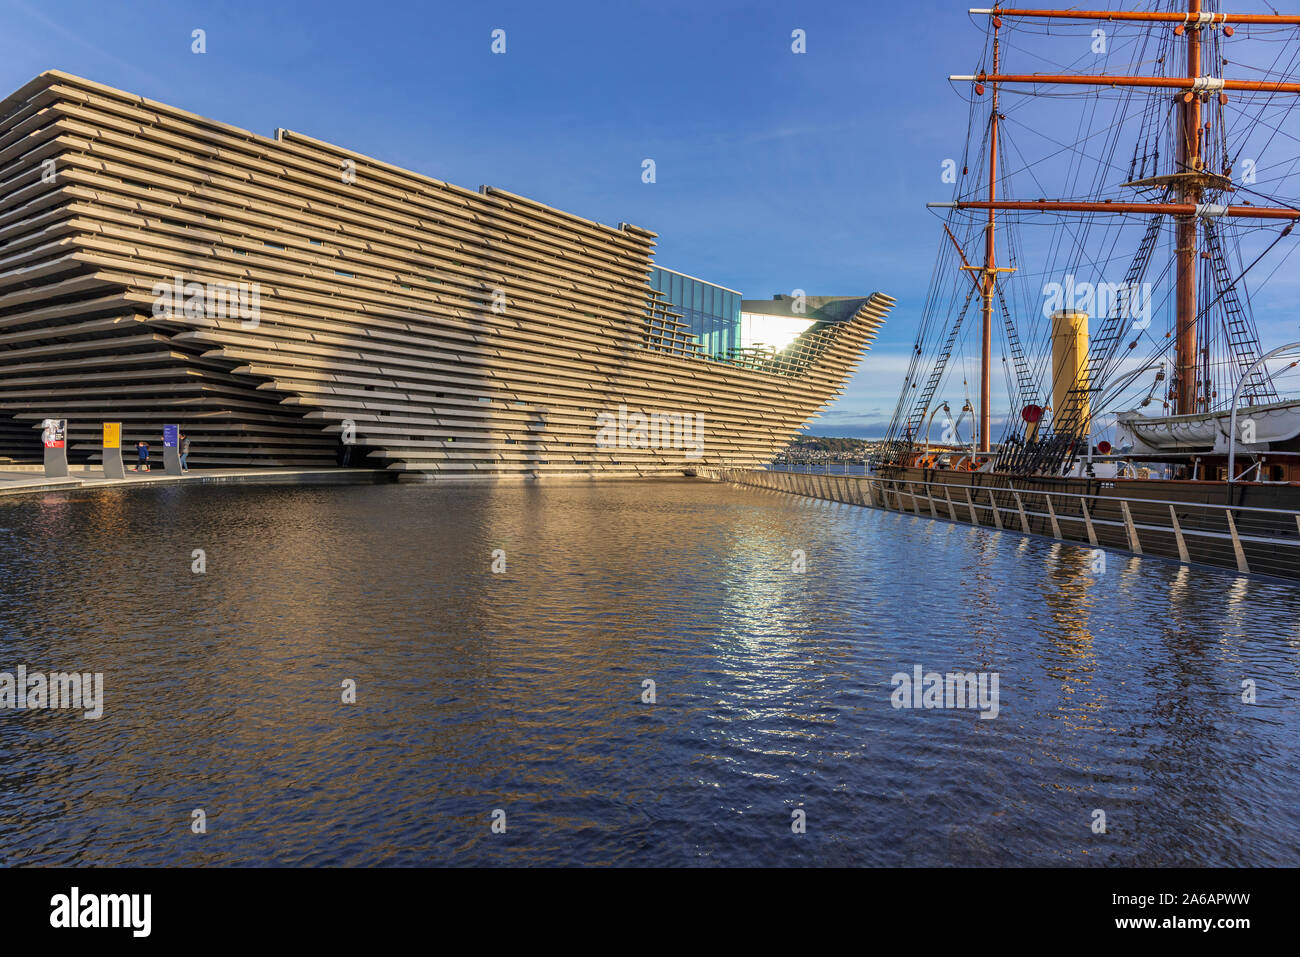 V & A museum on the banks of the river Tay at Dundee longside the Discovery Scotts Antarctica ship. Stock Photo